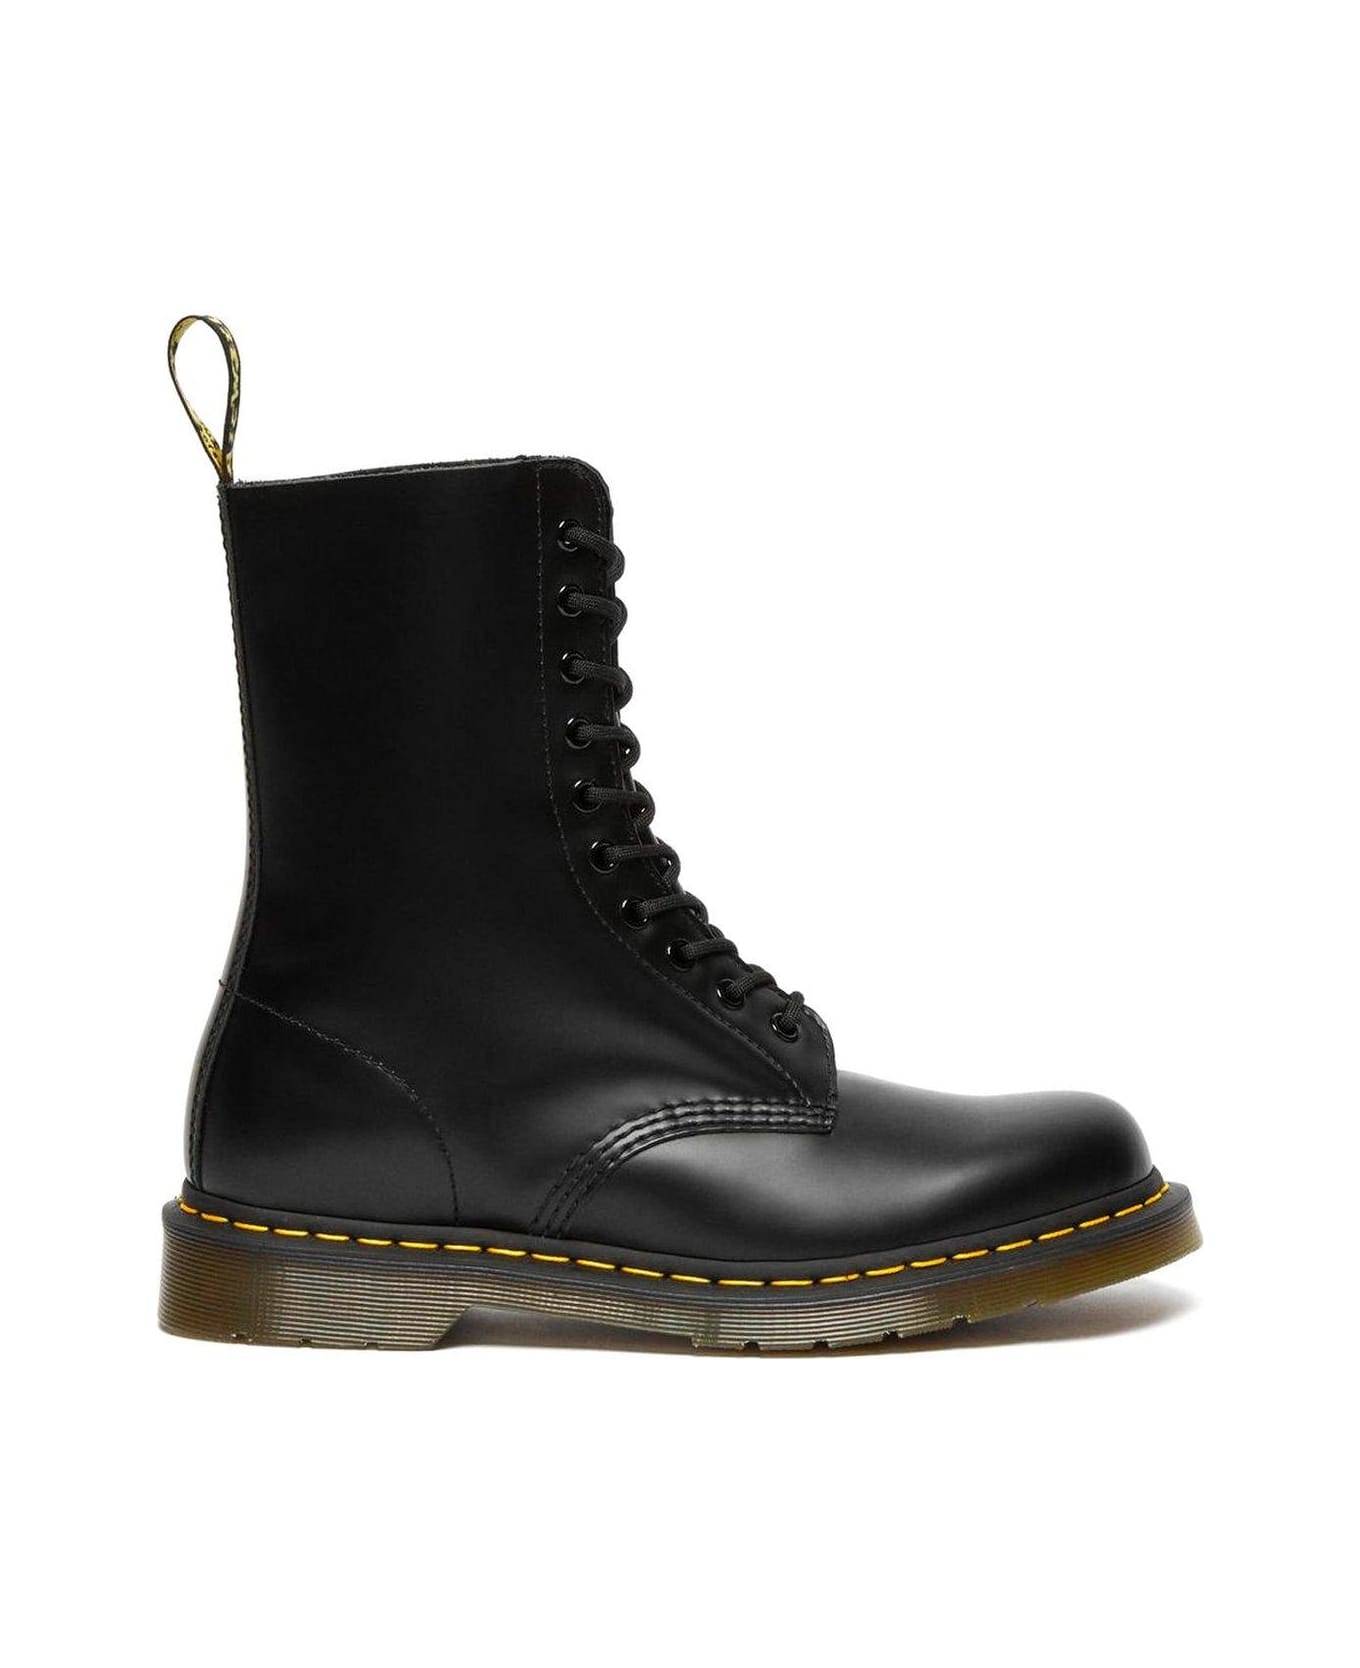 Dr. Martens 1490 Smooth Lace-up Boots ブーツ